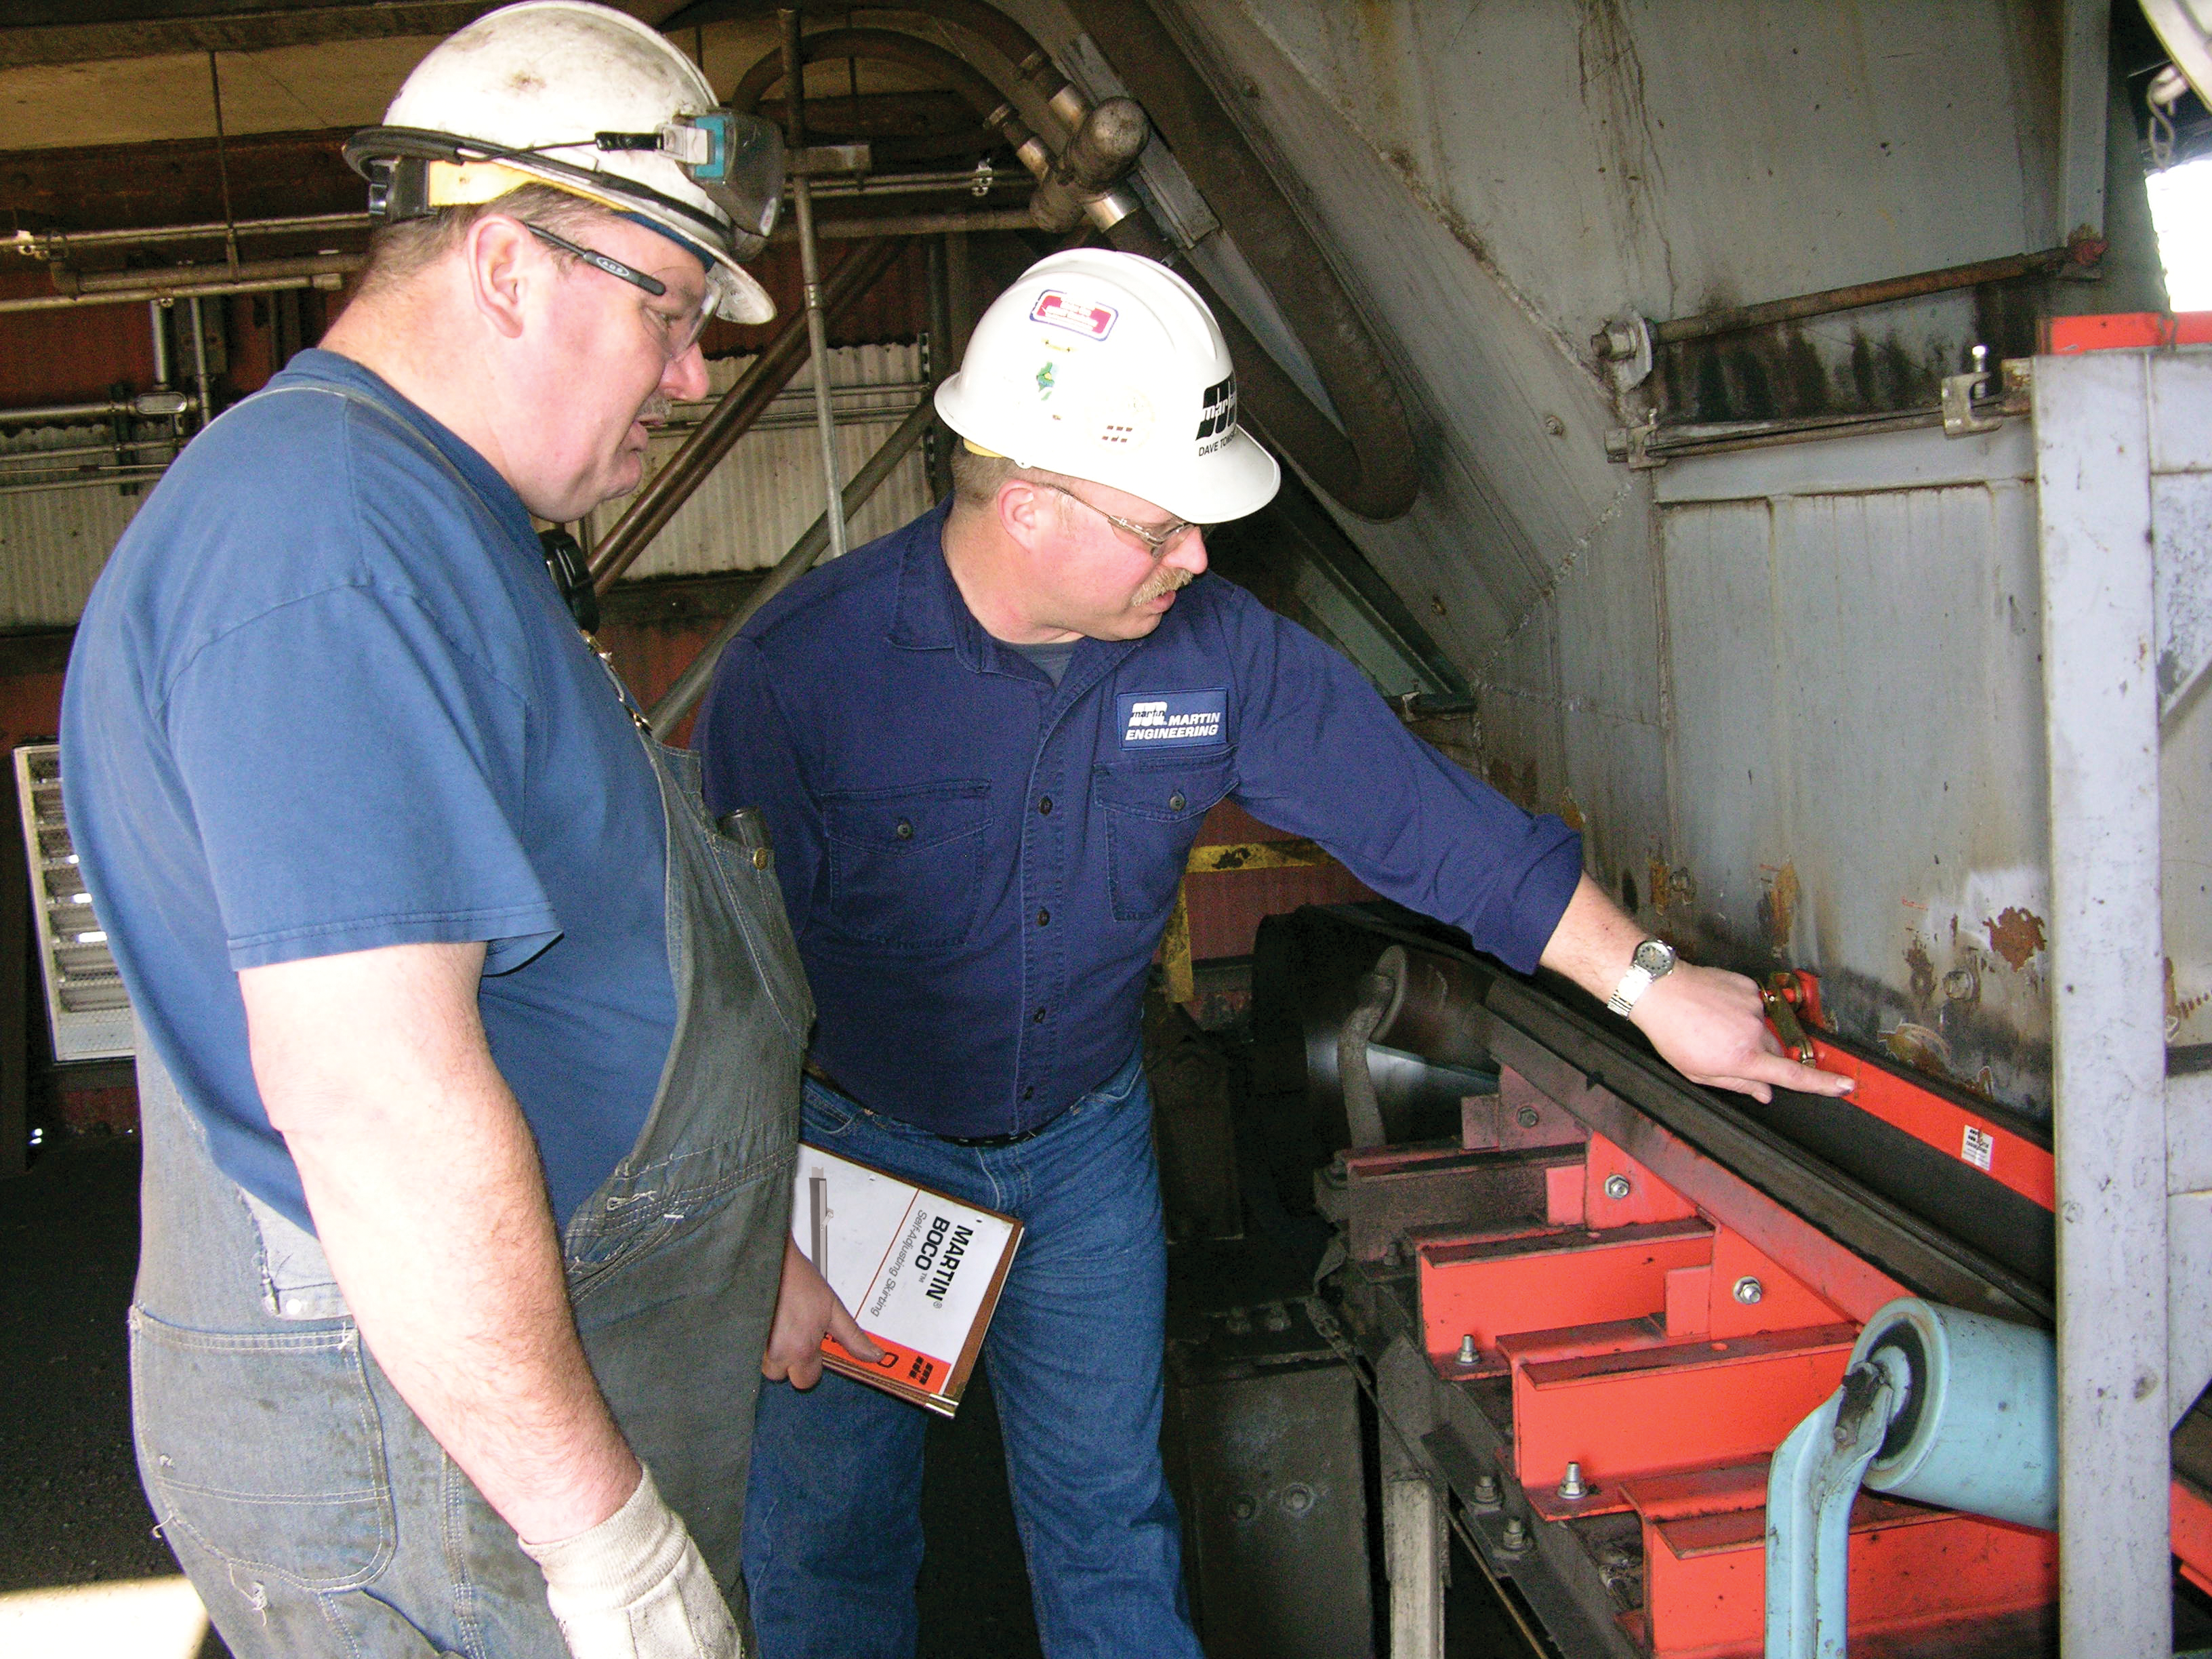 Conveyor expert discusses a belt conveyor system with a worker.